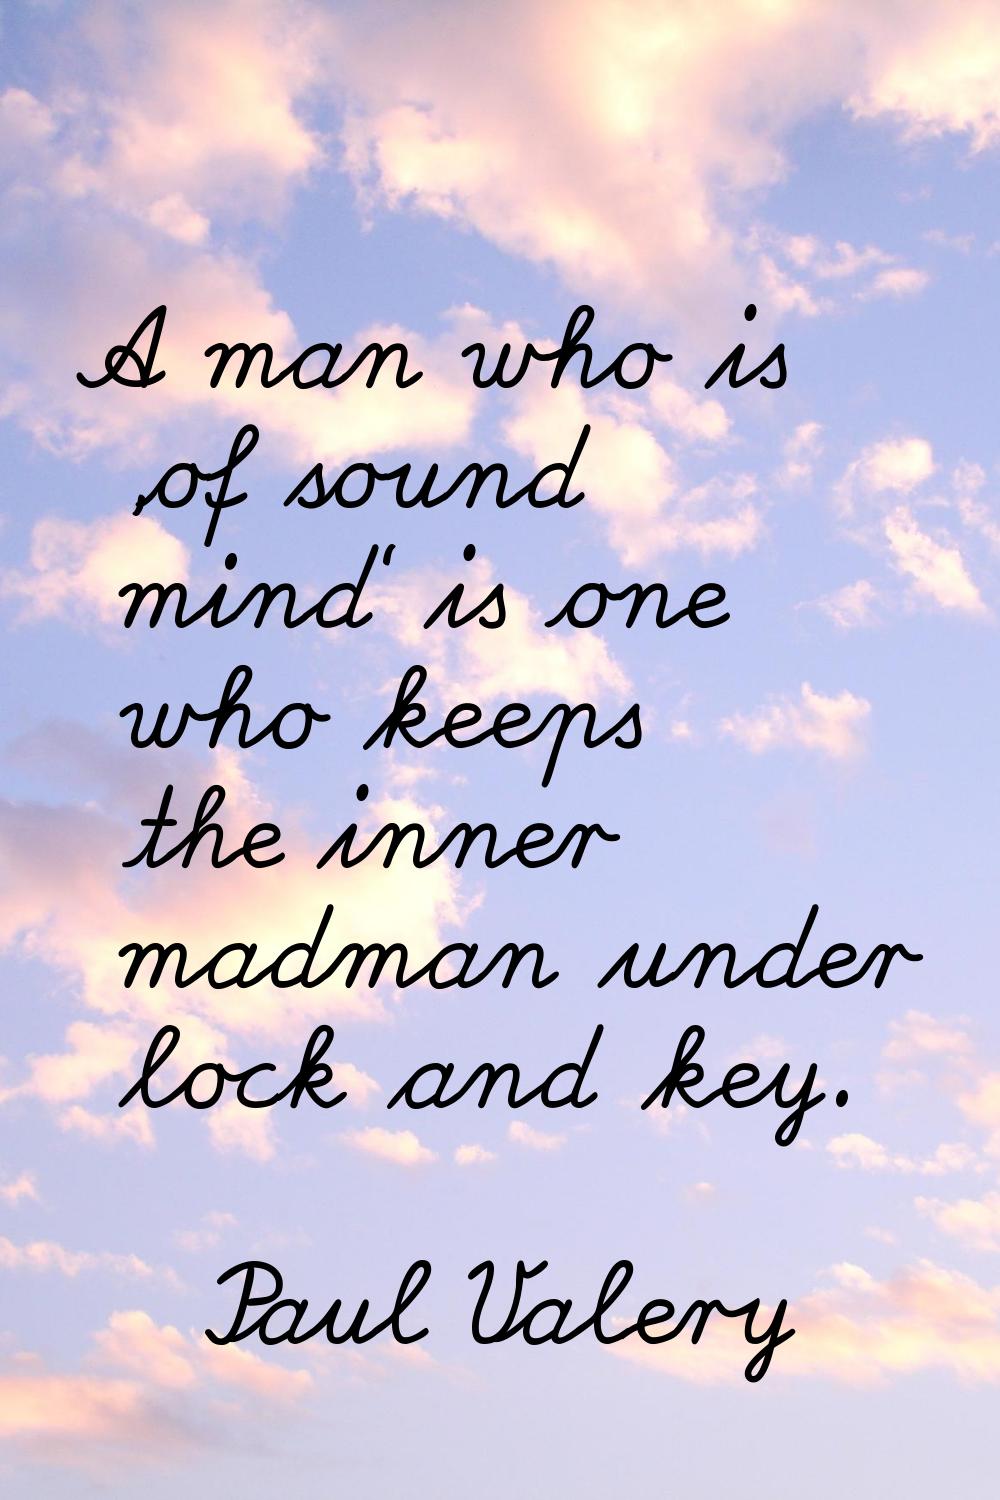 A man who is 'of sound mind' is one who keeps the inner madman under lock and key.